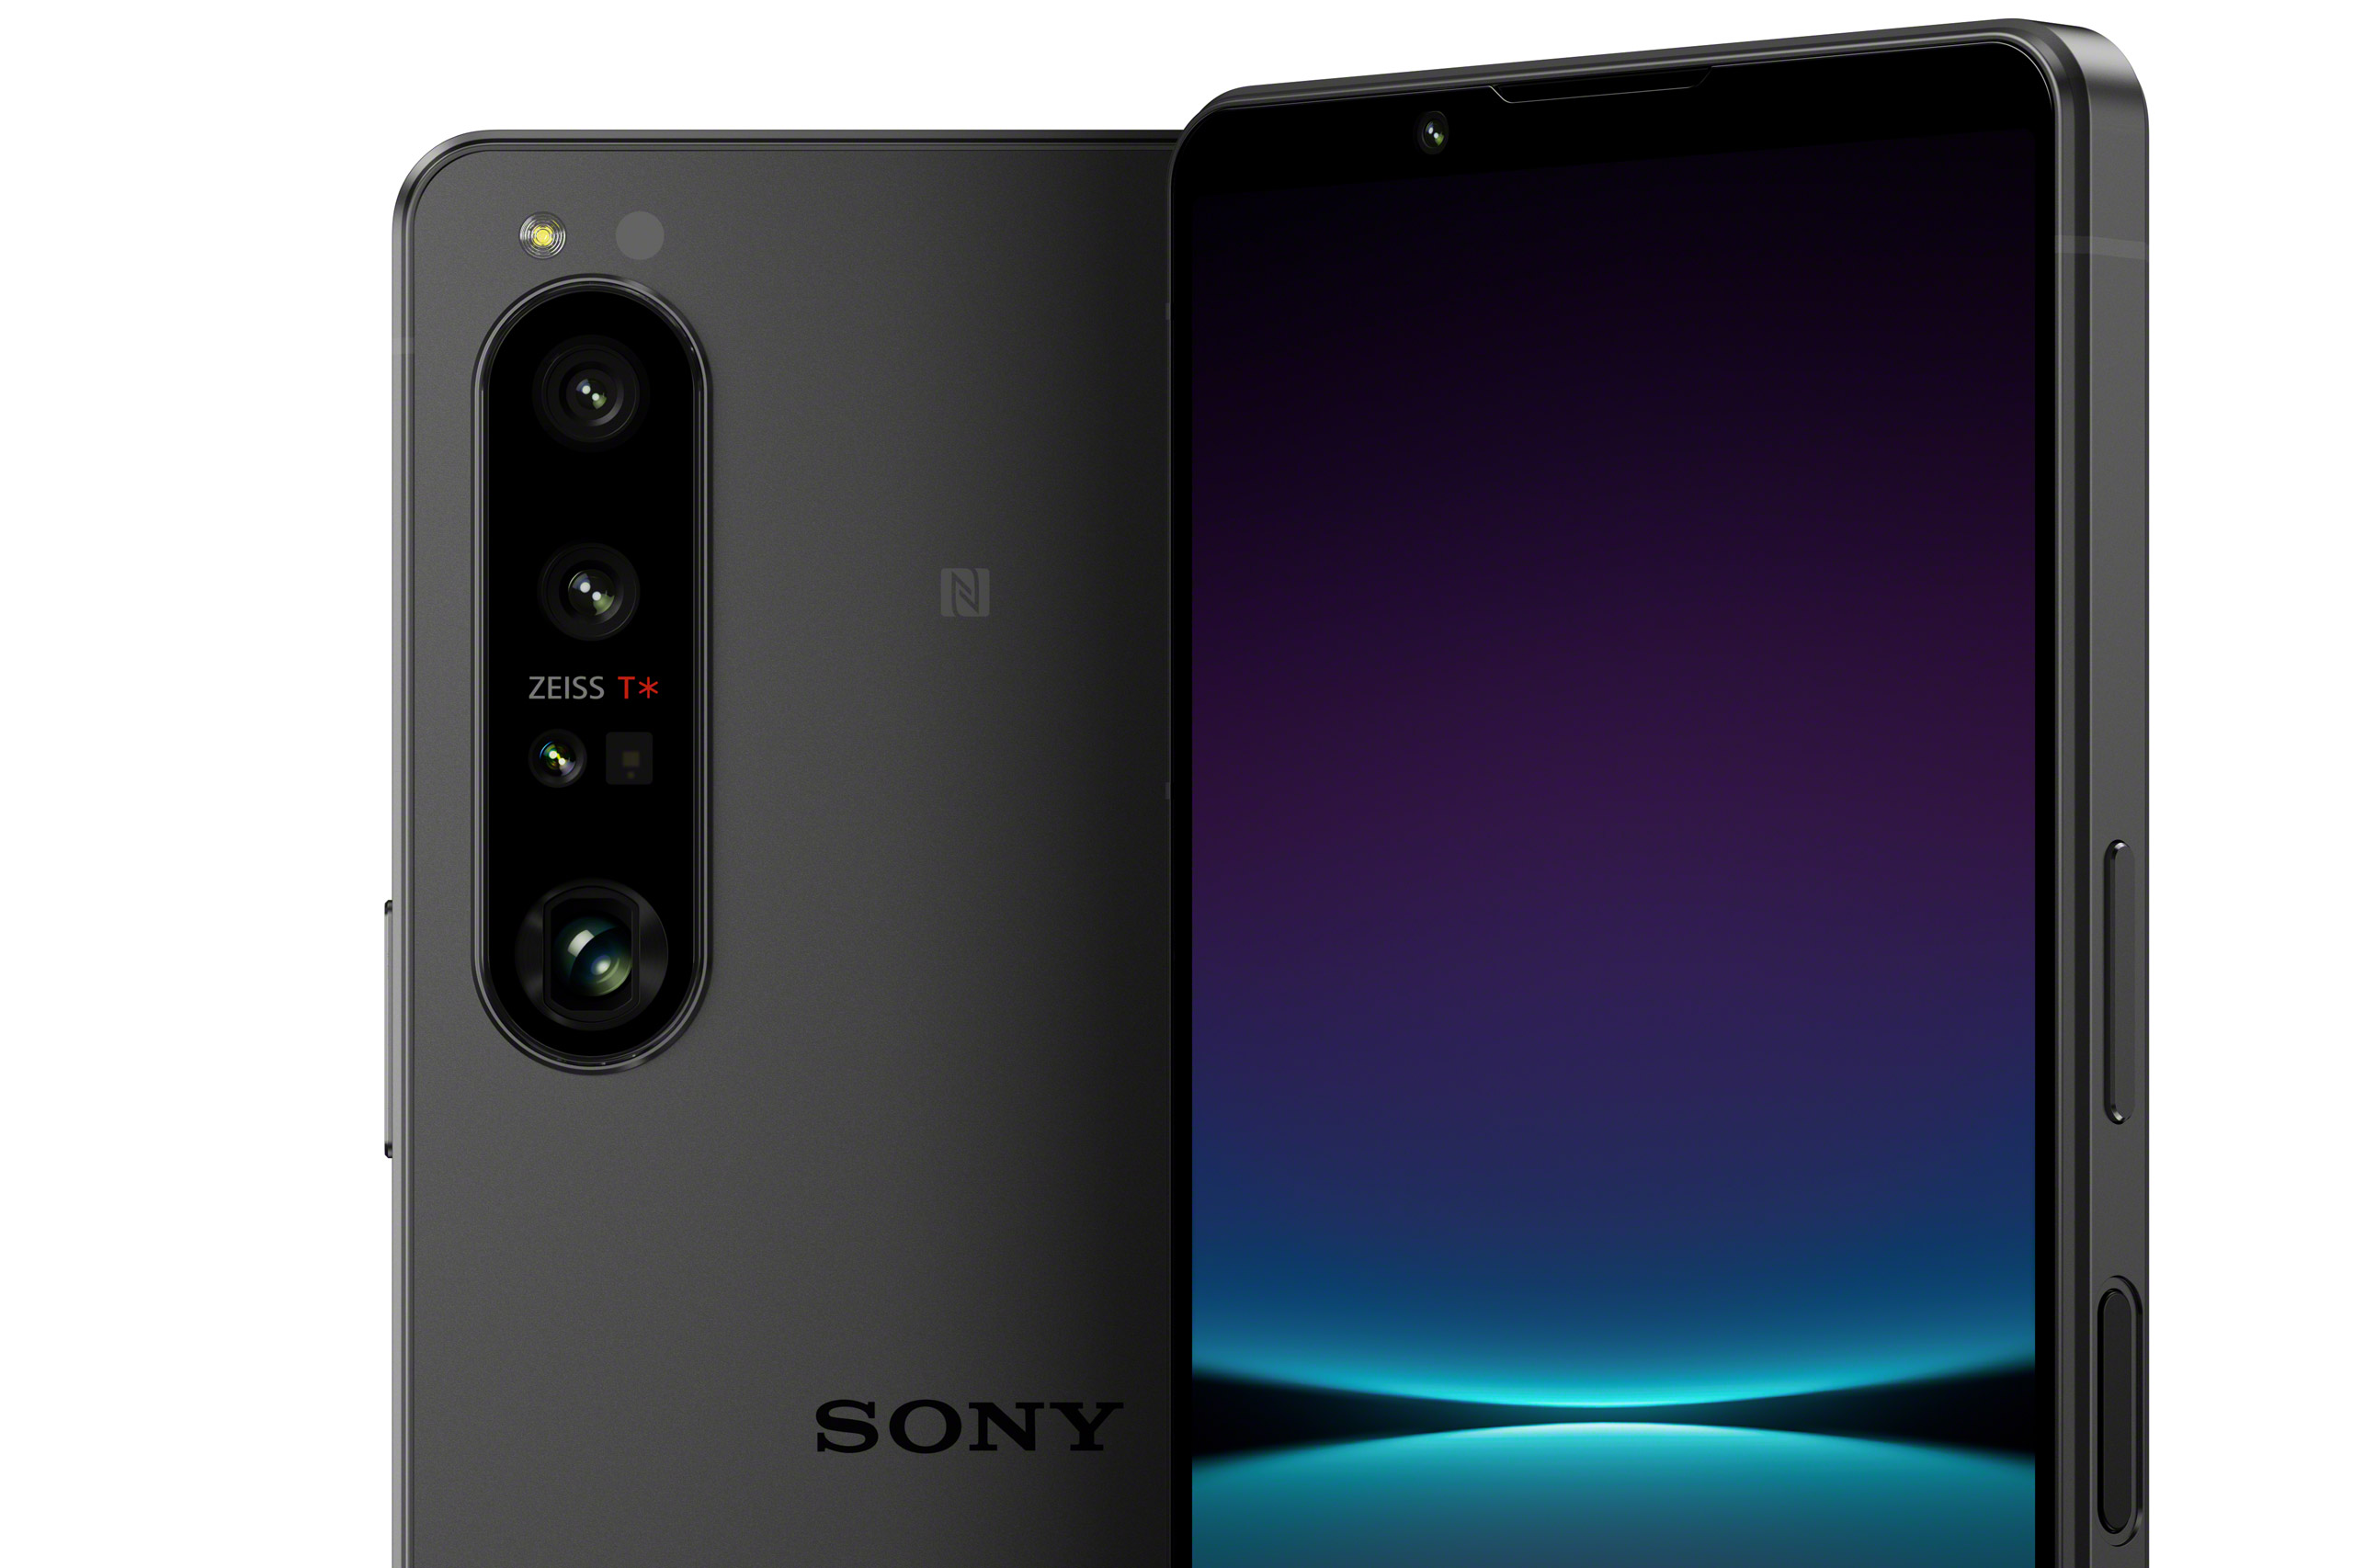 Sony Xperia 1 IV Announced - Optical Zoom, 4K/120p Recording on